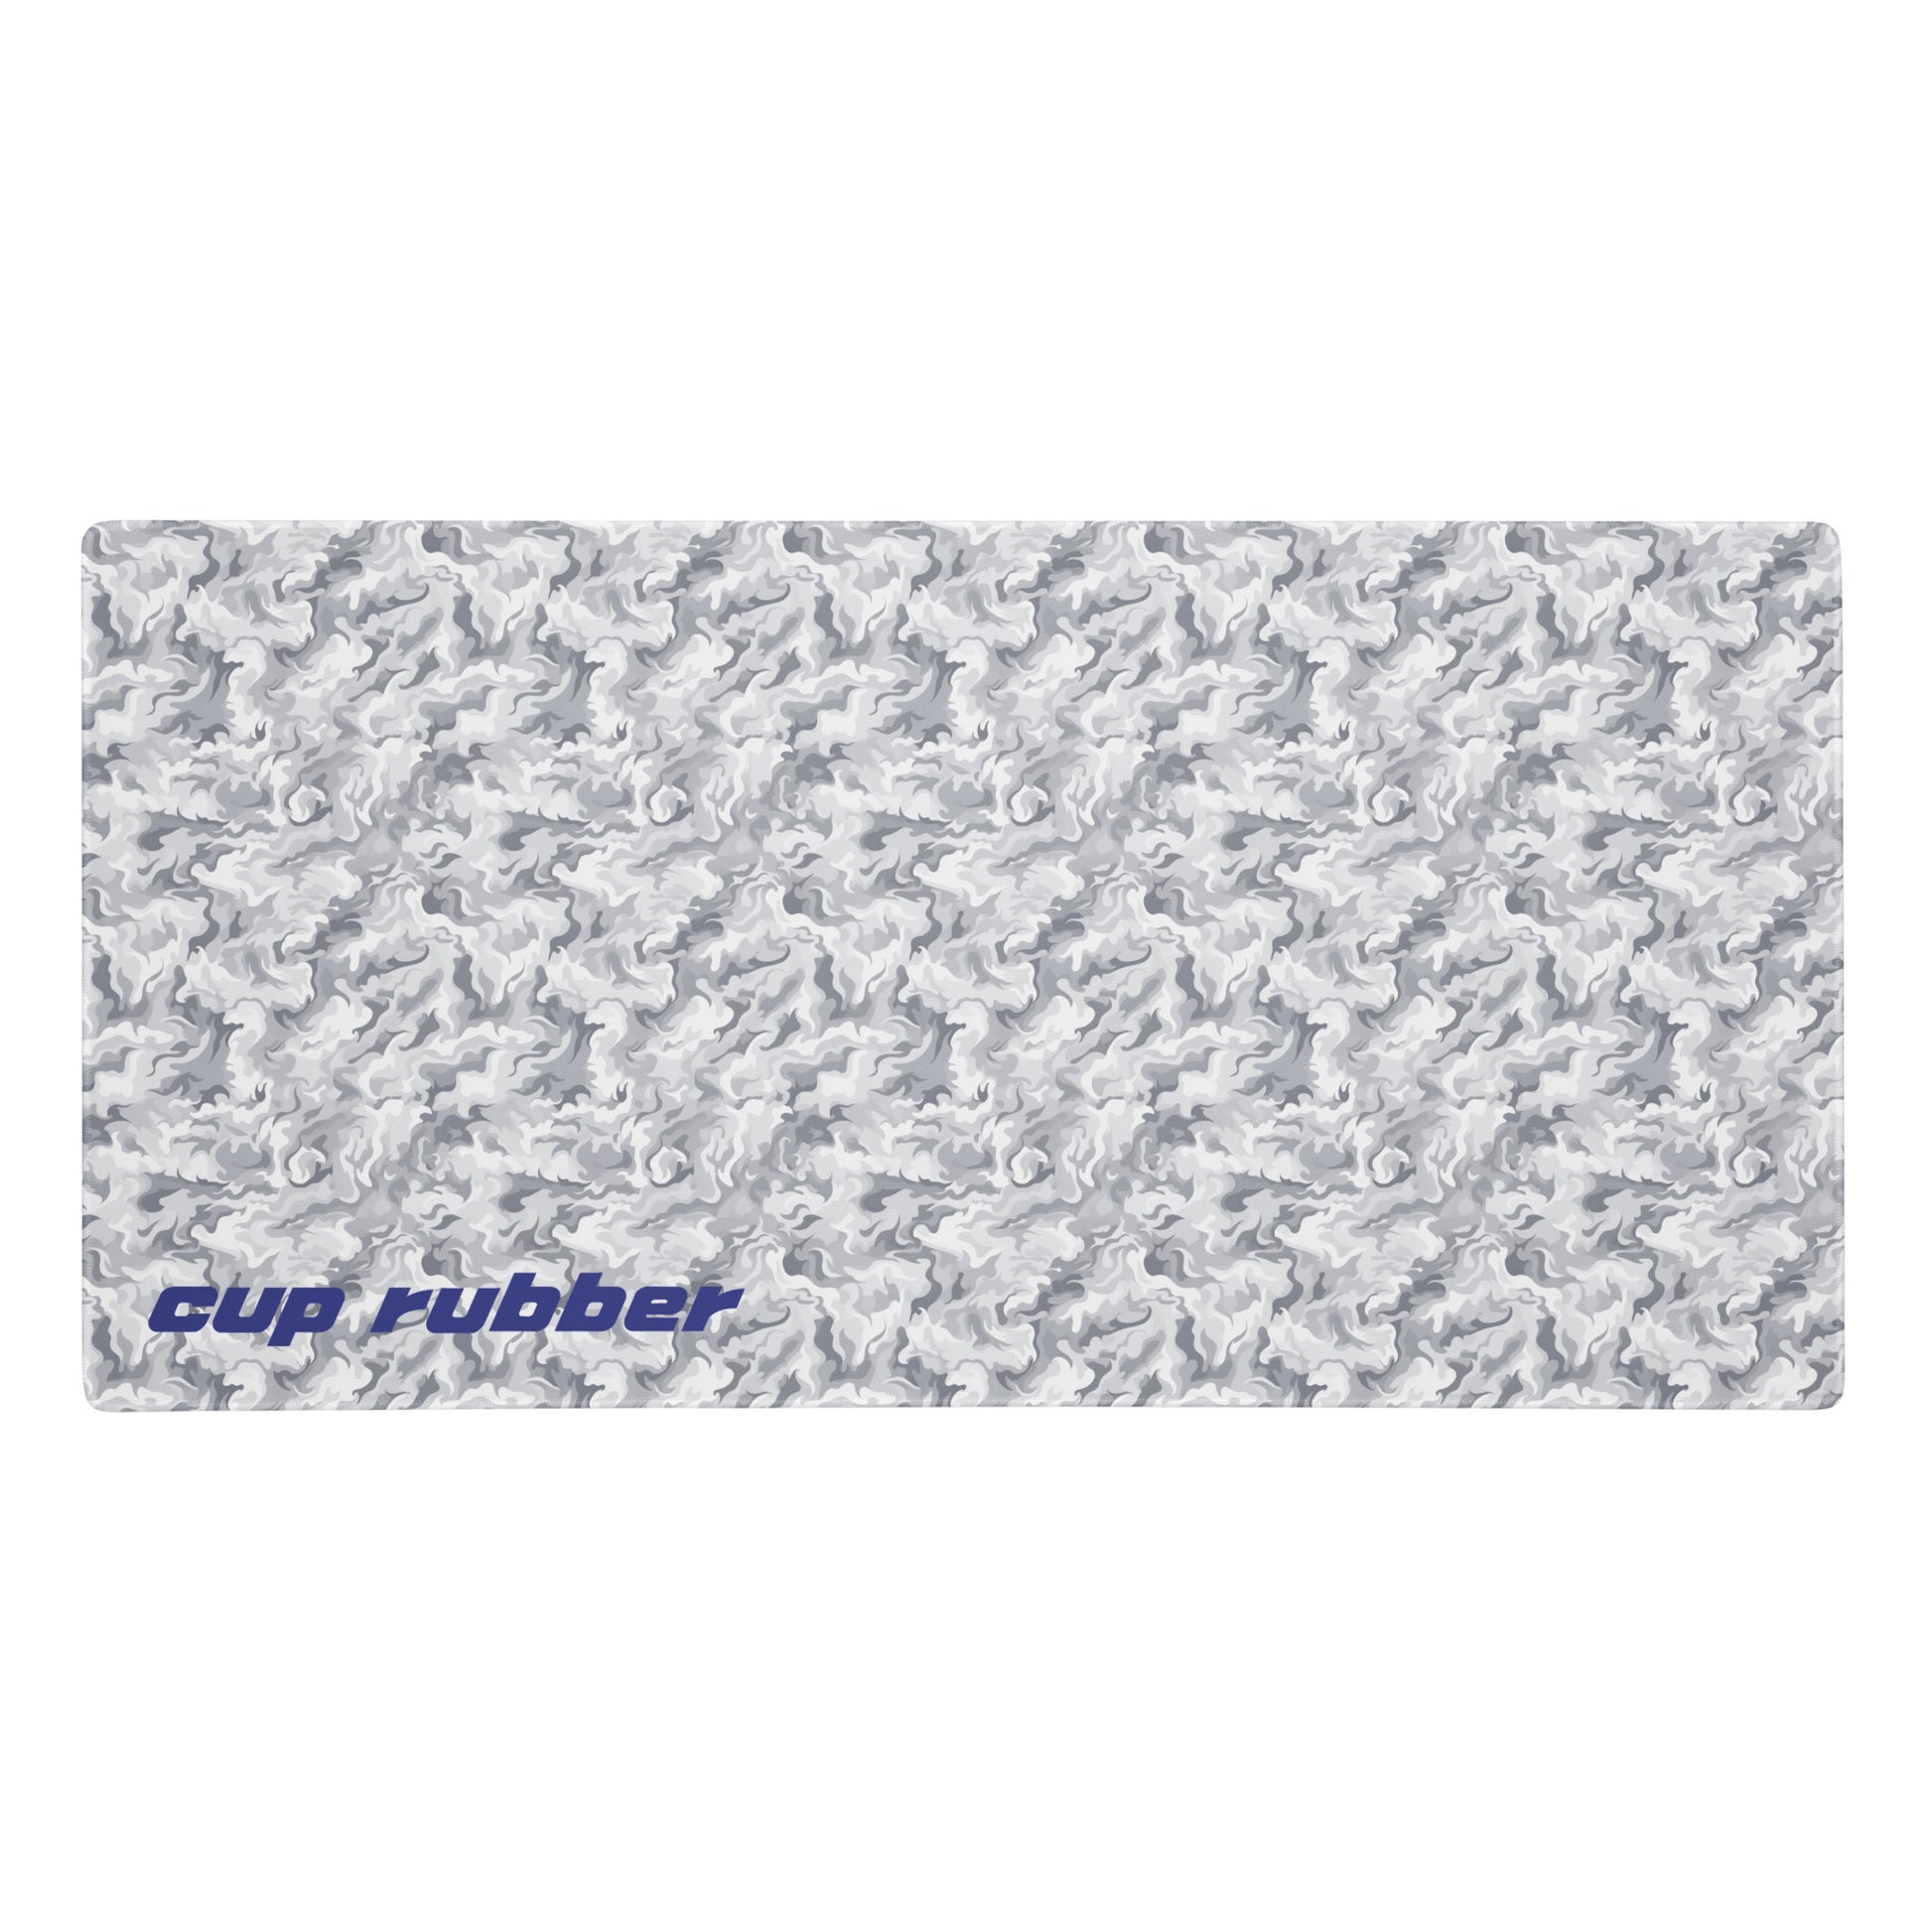 A 36" x 18" desk pad with a camo pattern and the word "Cup Rubber" on it in the bottom left corner. Beige and White in color.